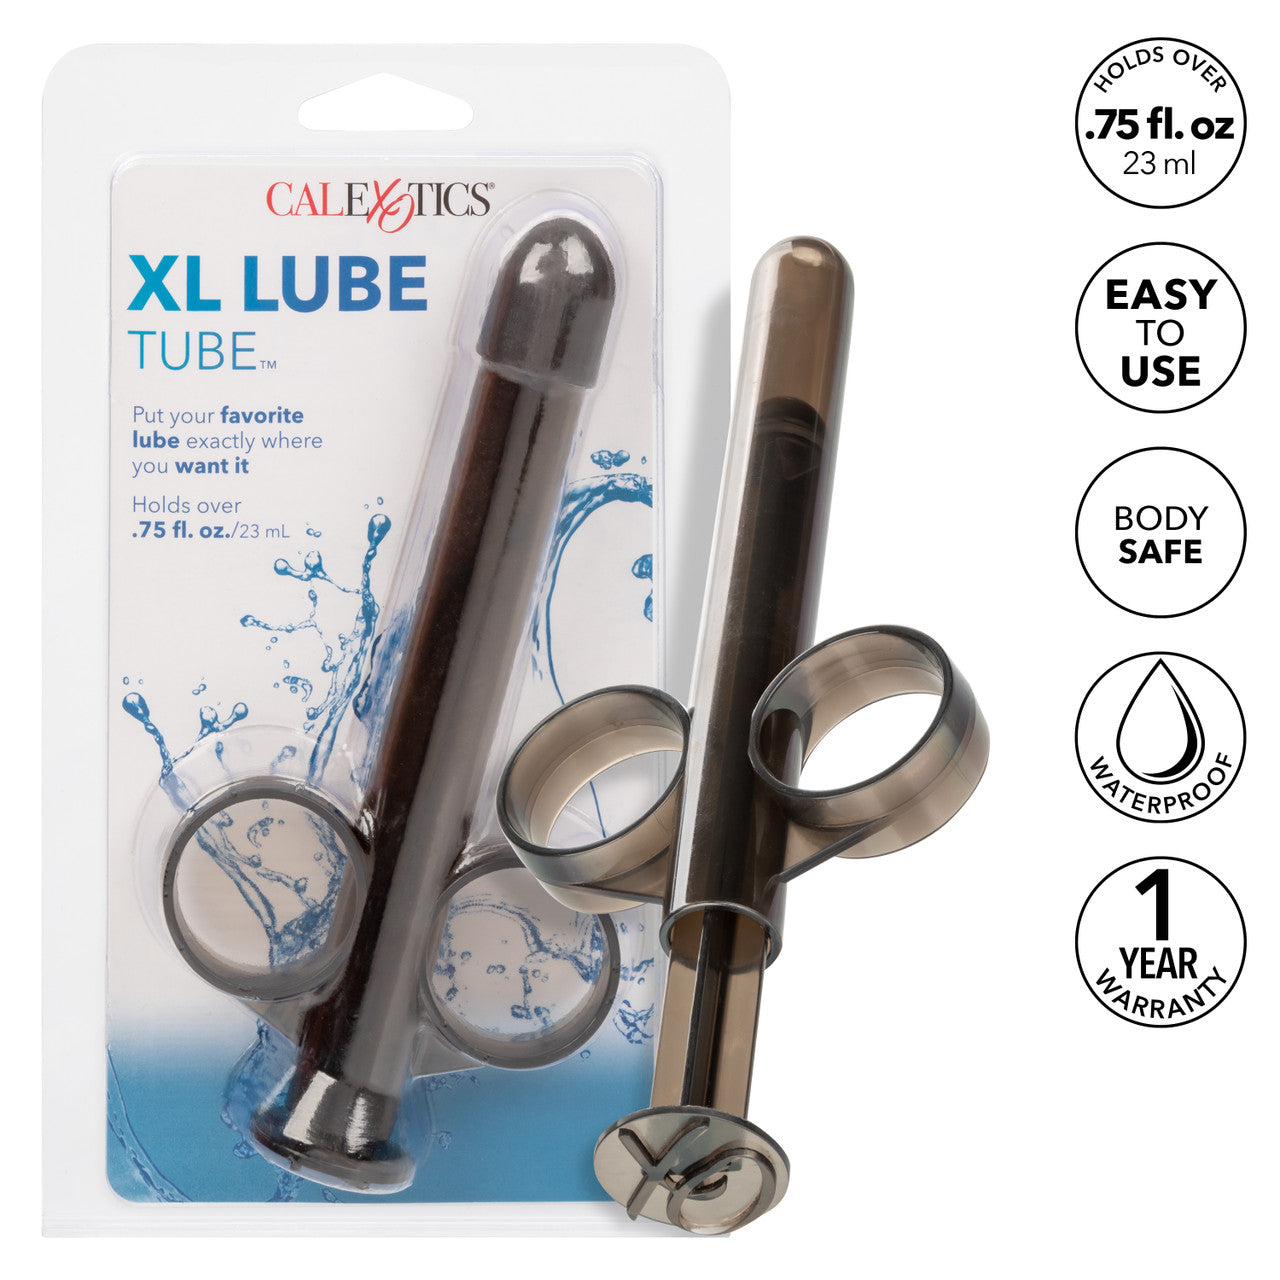 XL Lube Tube Applicator - Smoke - Thorn & Feather Sex Toy Canada